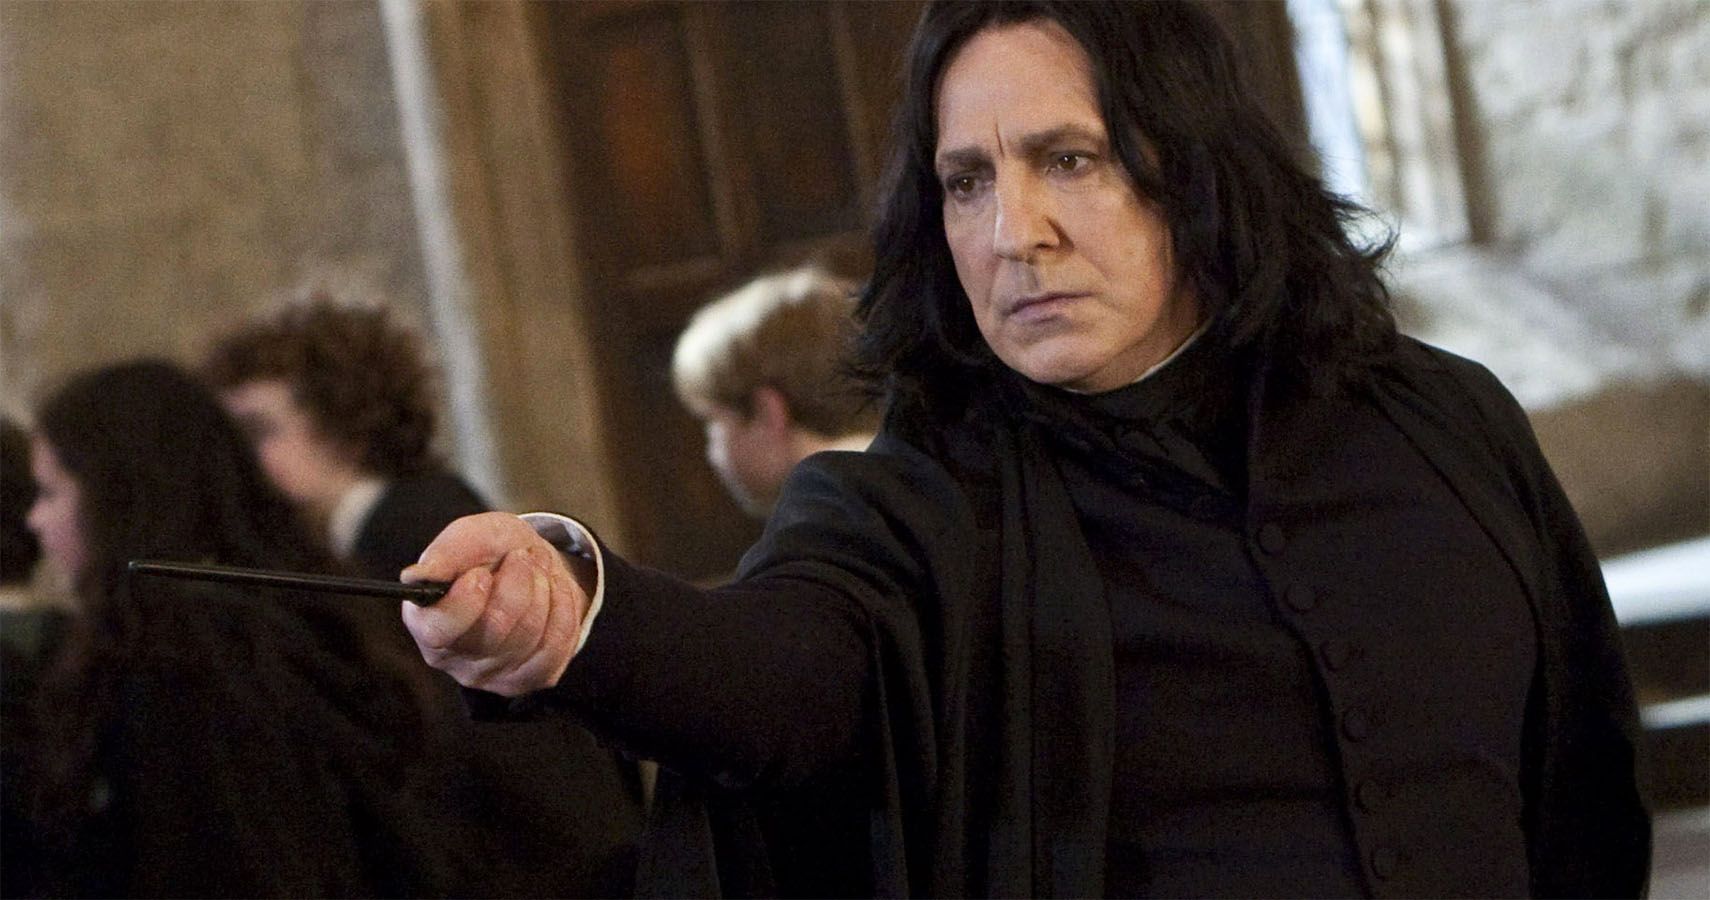 Severus Snape The Deathly Hallows: Part 2.